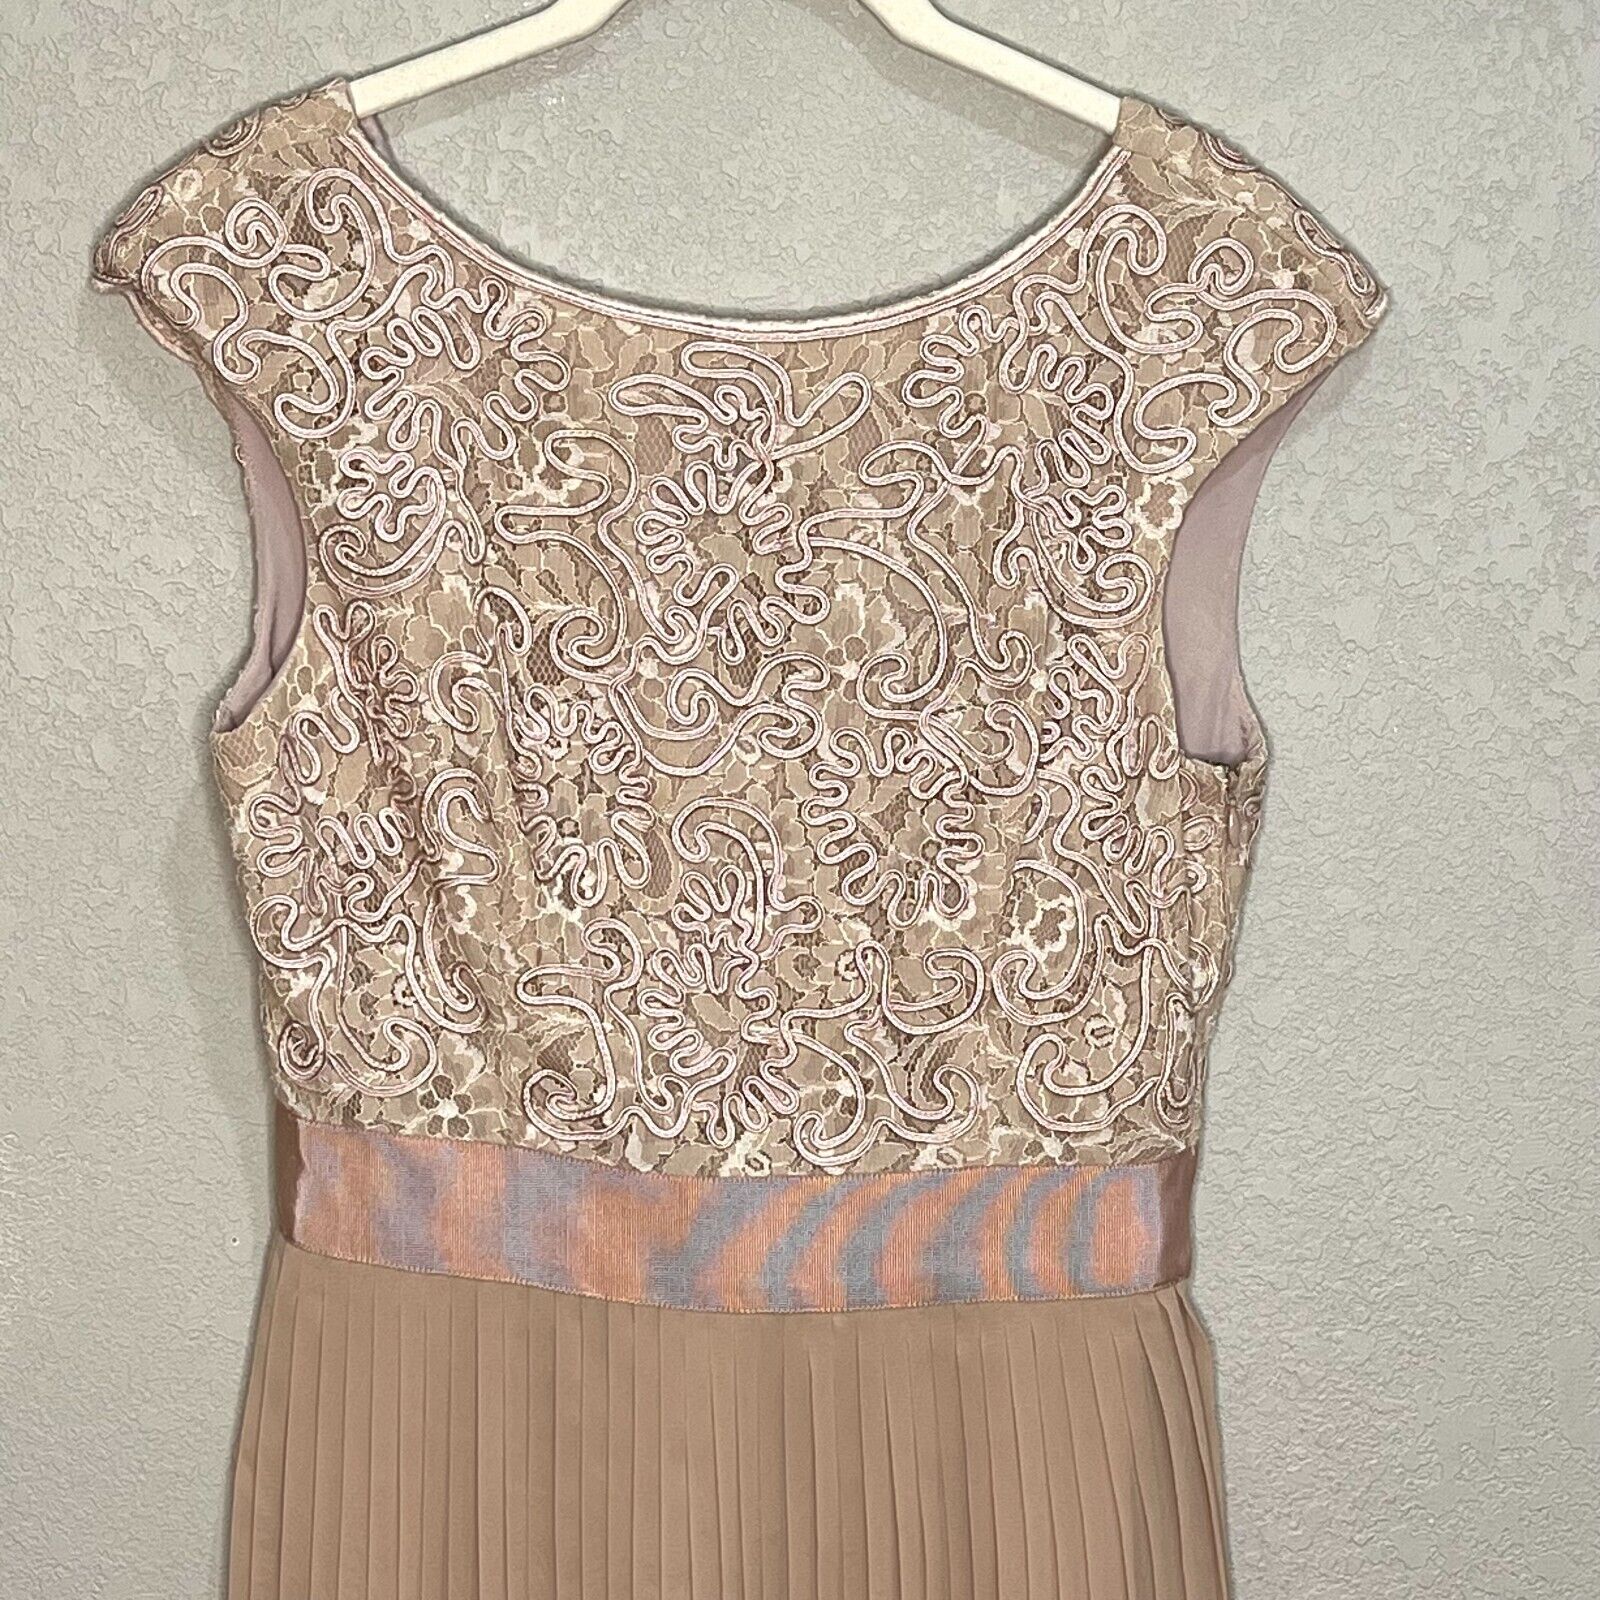 Ted Baker Pink Blush Aliana Lace Dress Size 6 ( Ted Baker 2)